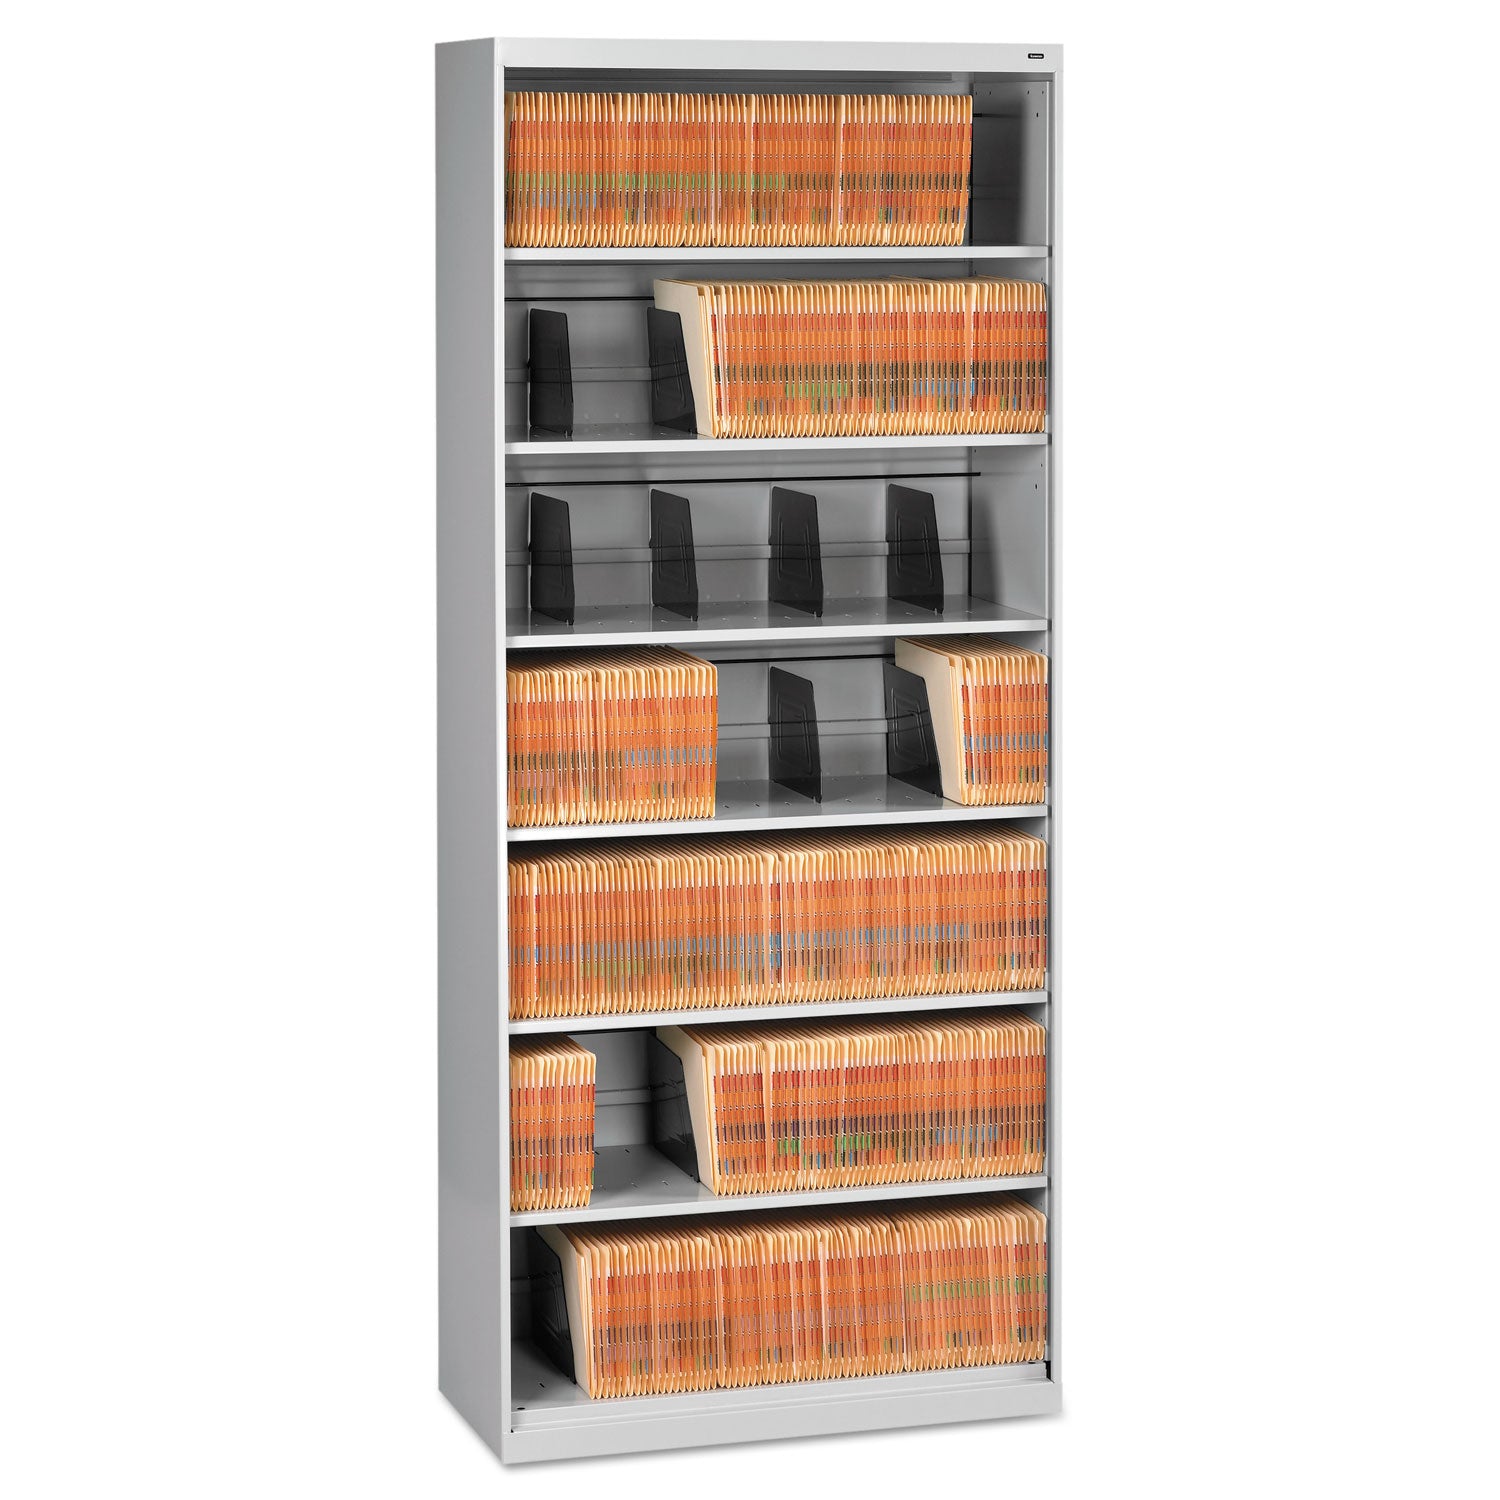 fixed-shelf-open-format-lateral-file-for-end-tab-folders-7-legal-letter-file-shelves-light-gray-36-x-165-x-87_tnnfs370lgy - 1